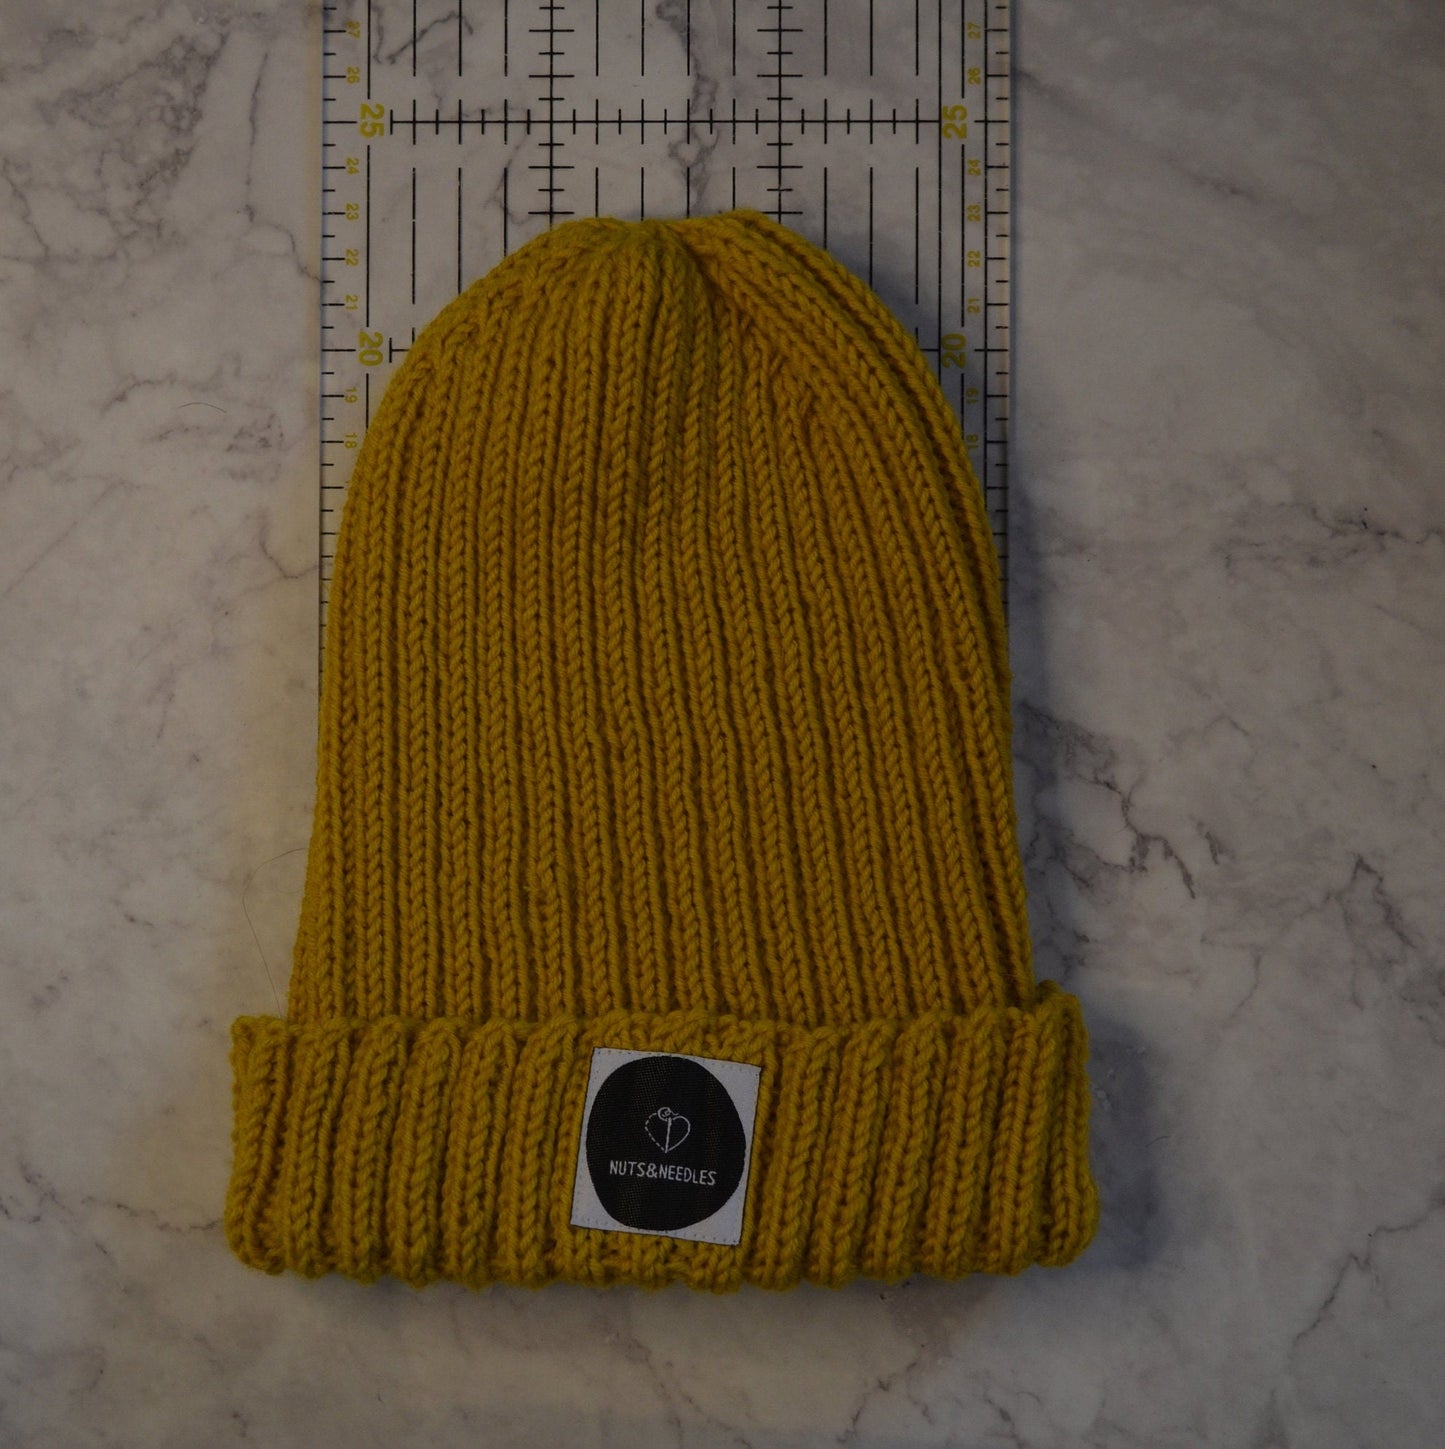 Beanie Suicide Prevention and Awareness, Mental Health, part of profit donated to Charity, handmade knitwear, knit Merino wool beanie